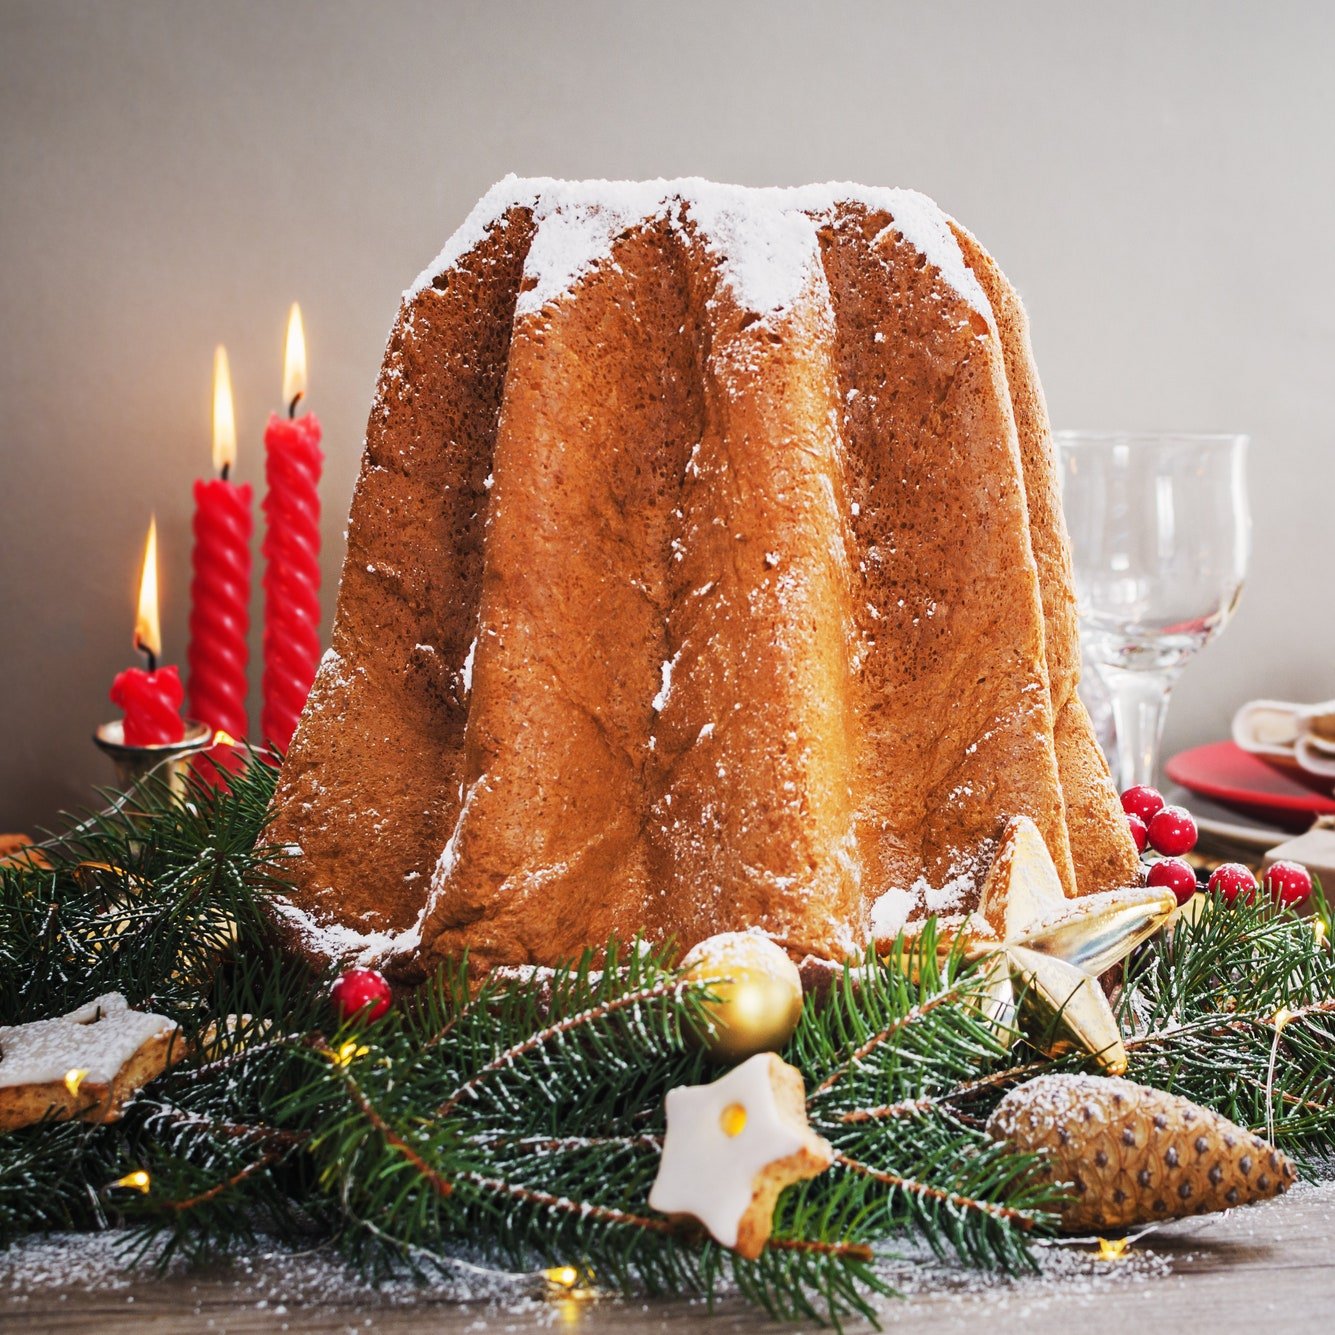 Crazy for Pandoro: Where to Find the Classic Italian Holiday Cake